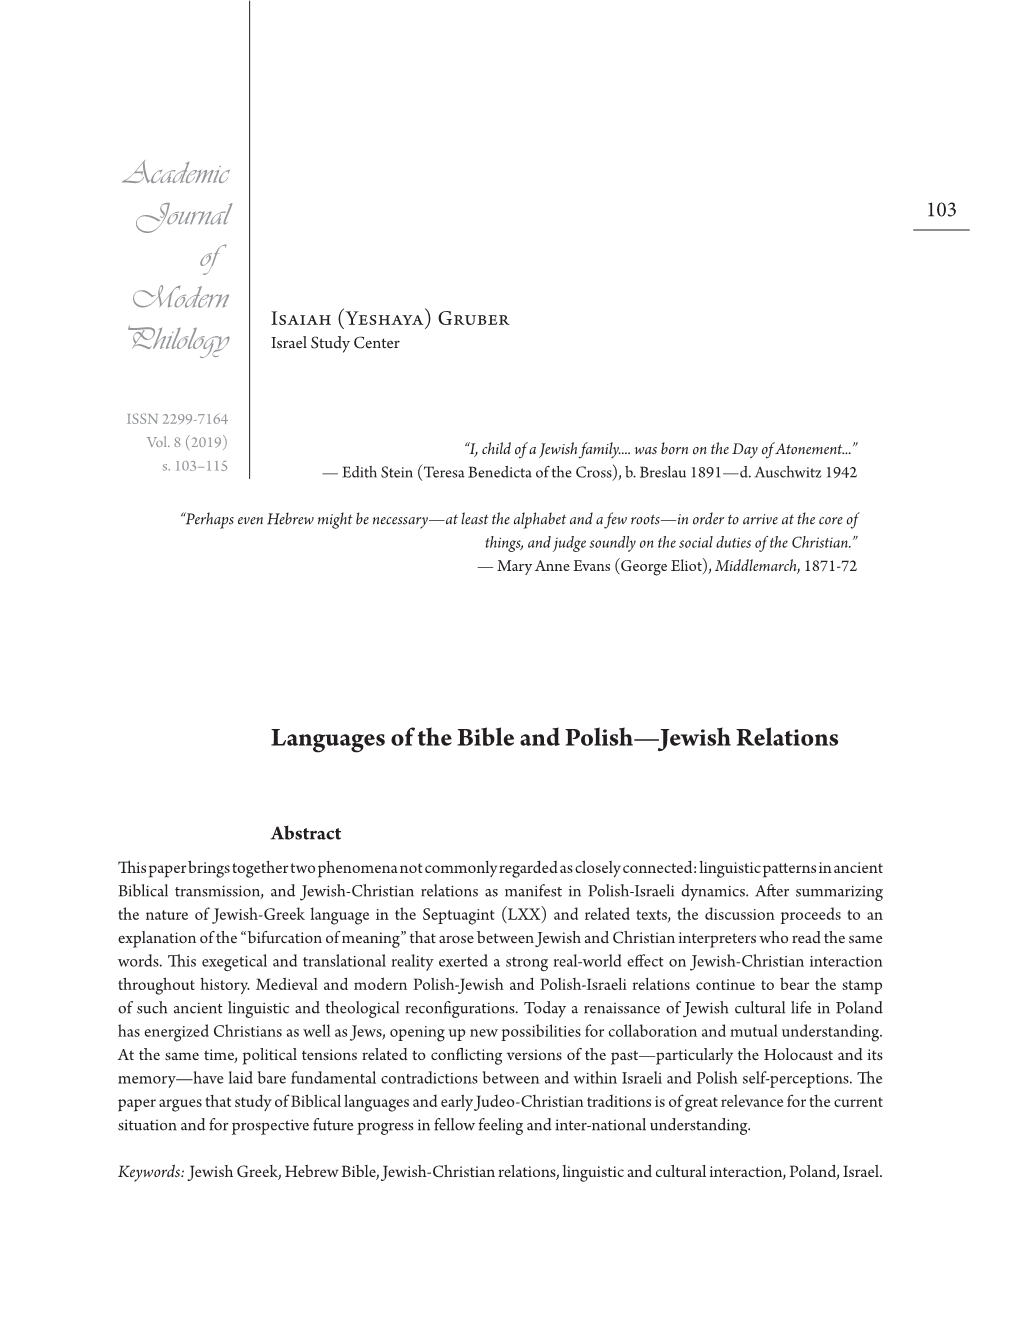 Languages of the Bible and Polish—Jewish Relations